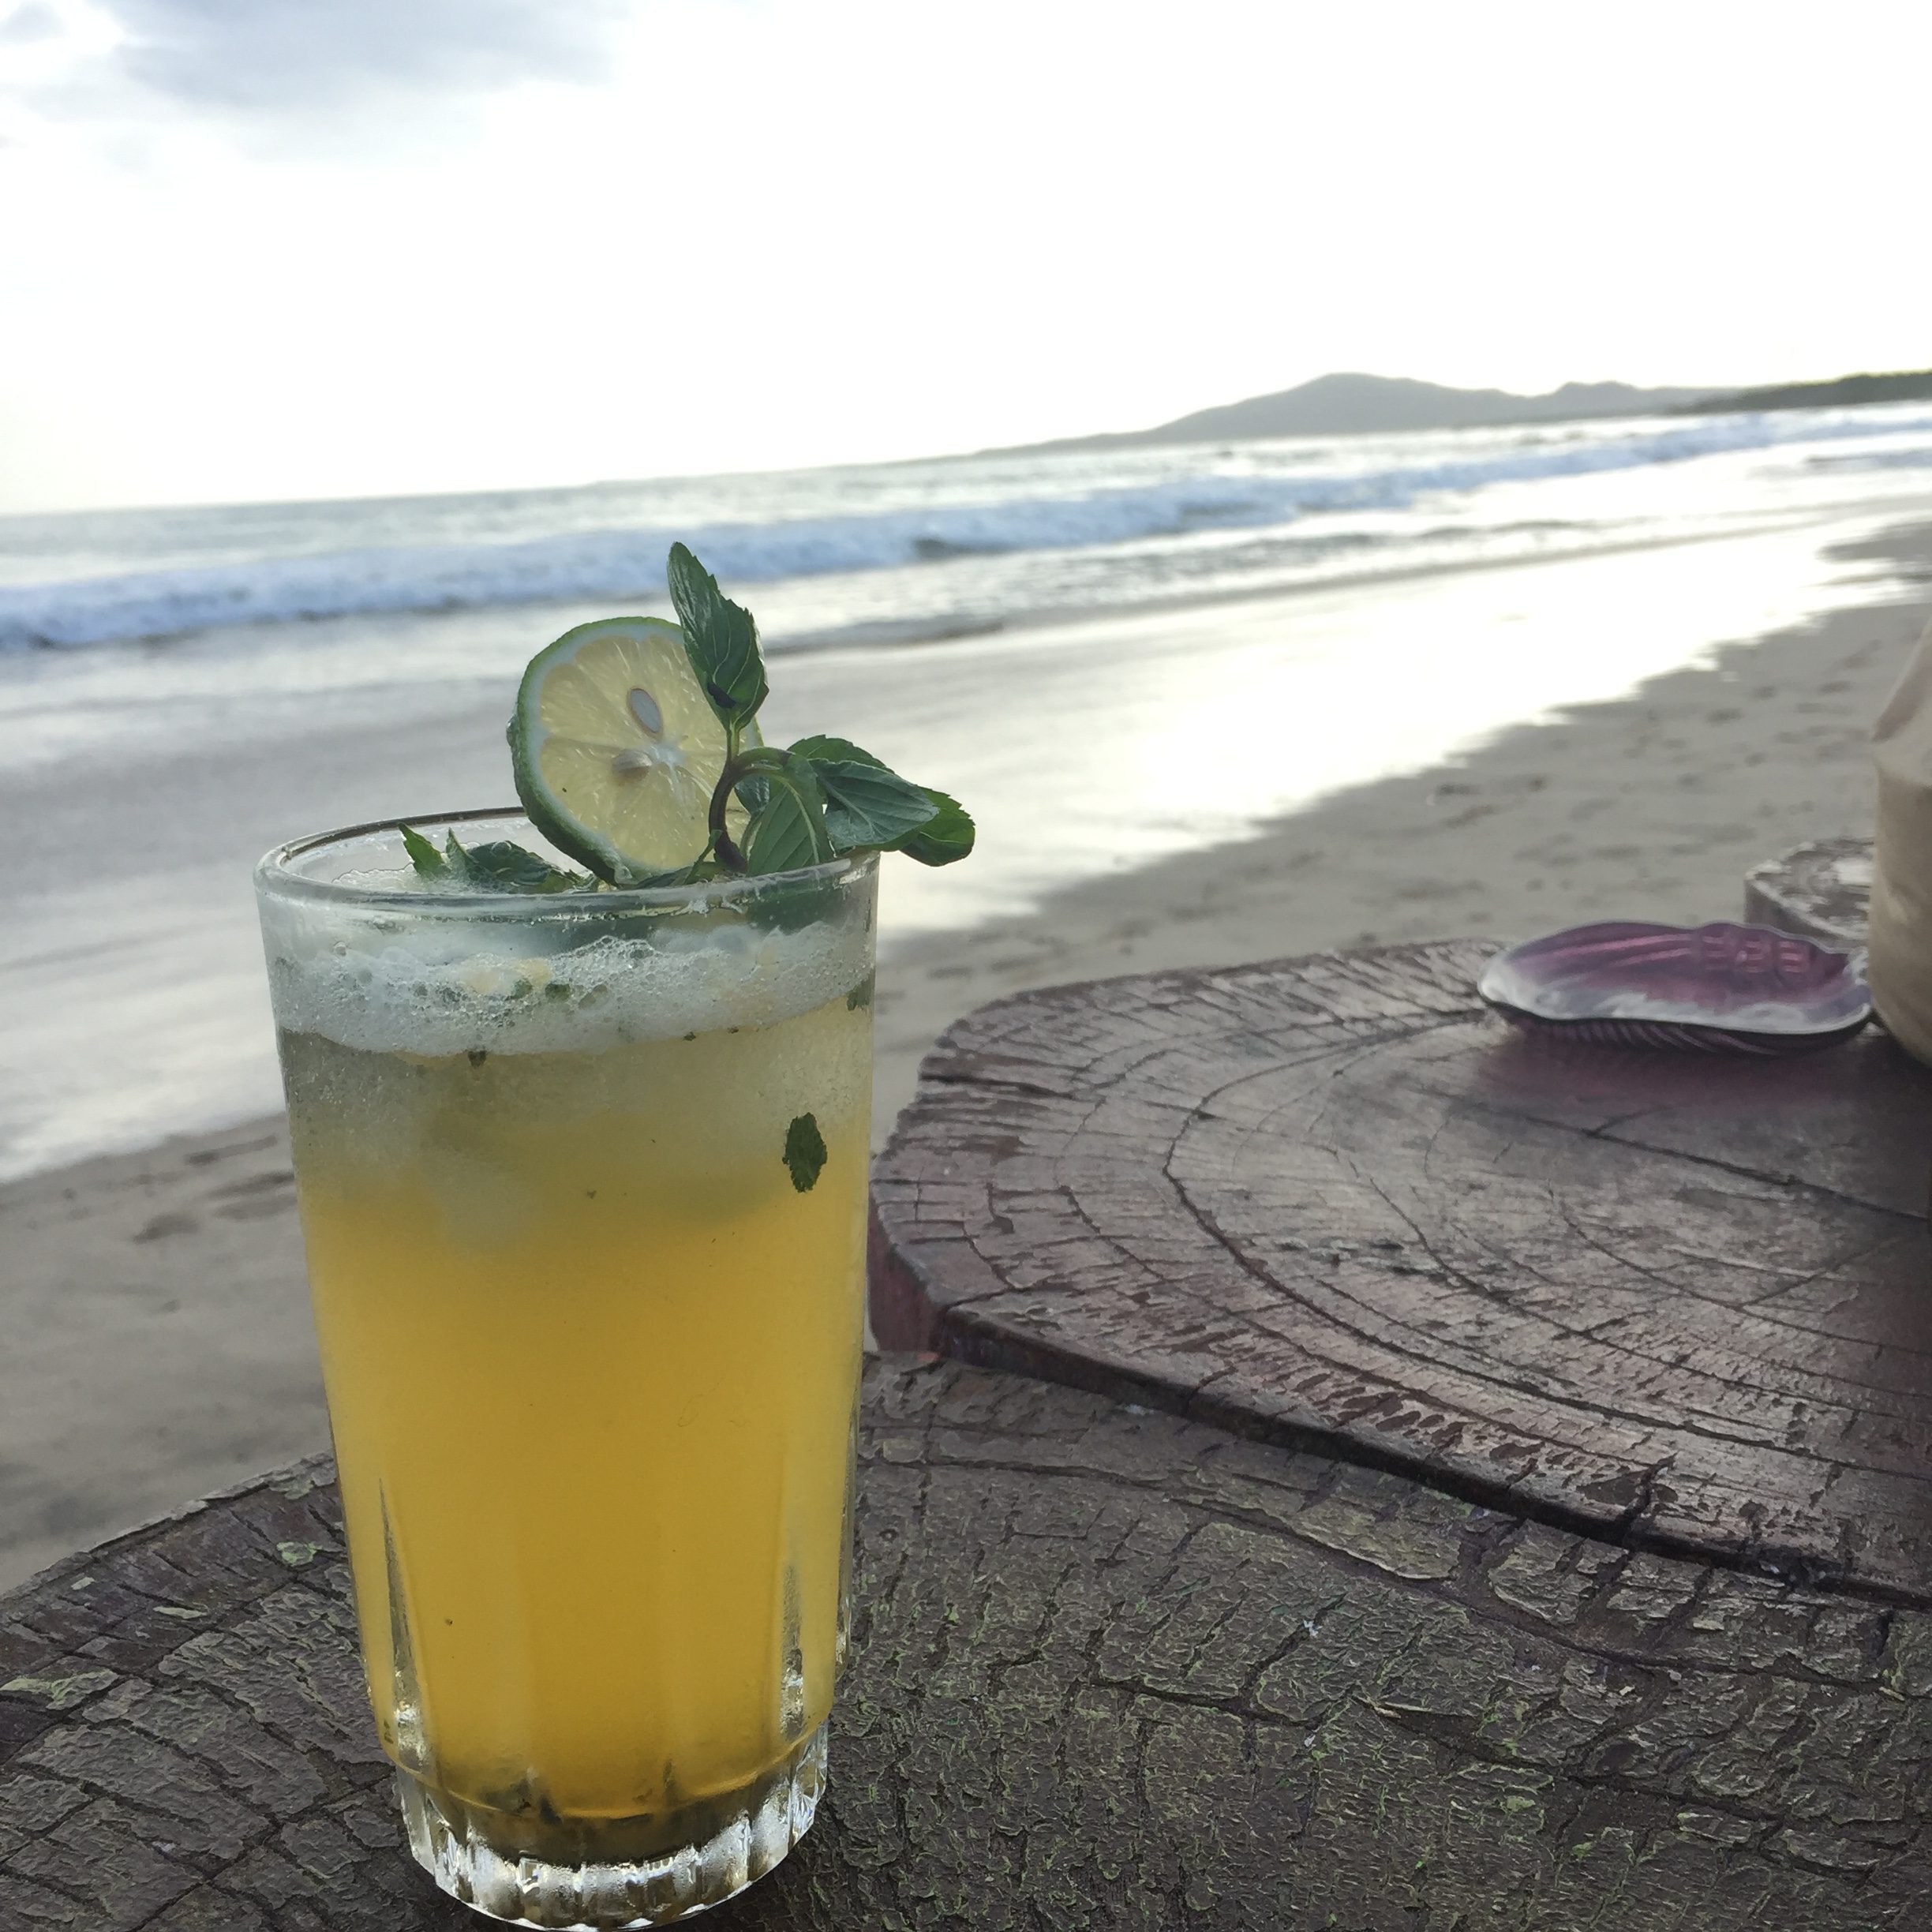 Fresh passion fruit mojitos served to me in a hammock on Isla Isabela in the Galapagos Islands. I'm pretty sure this is the best my life will get.